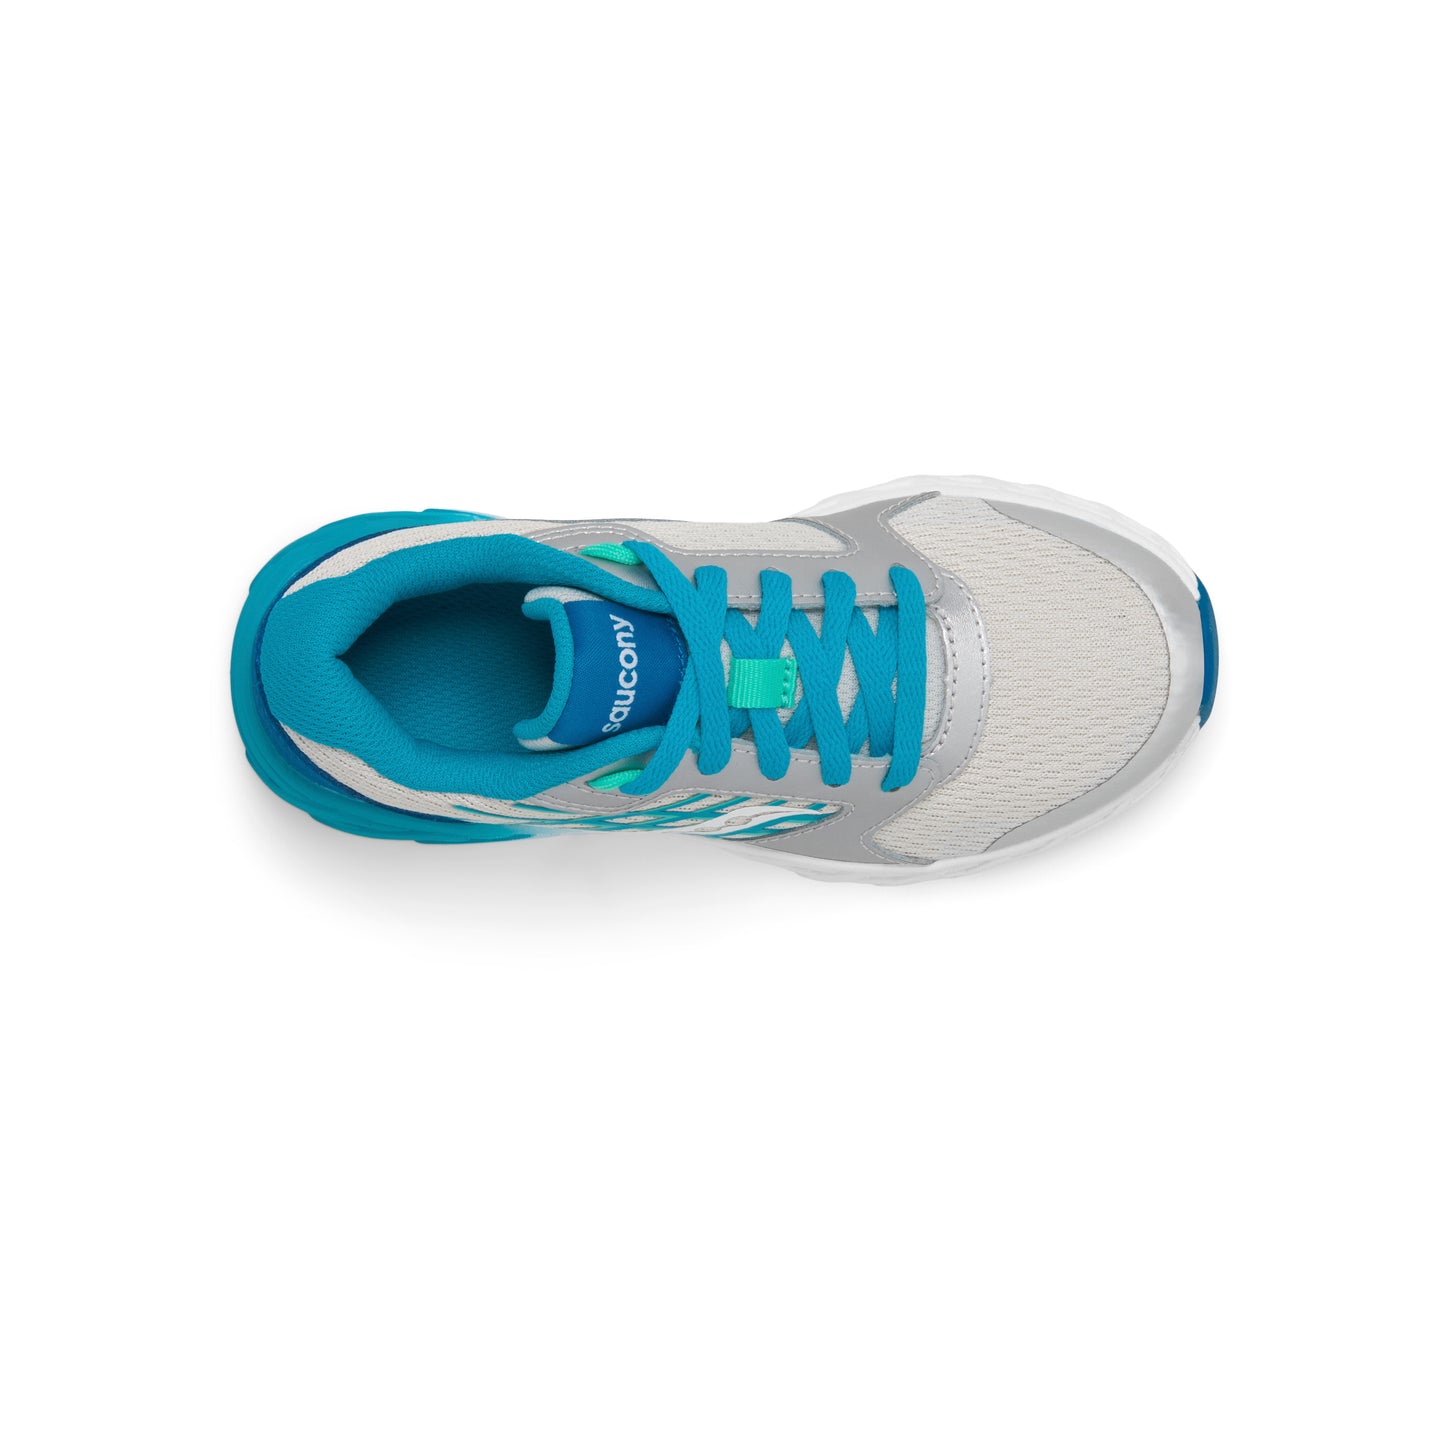 wind-20-sneaker-bigkid-turquoise-silver__Turquoise/Silver_6